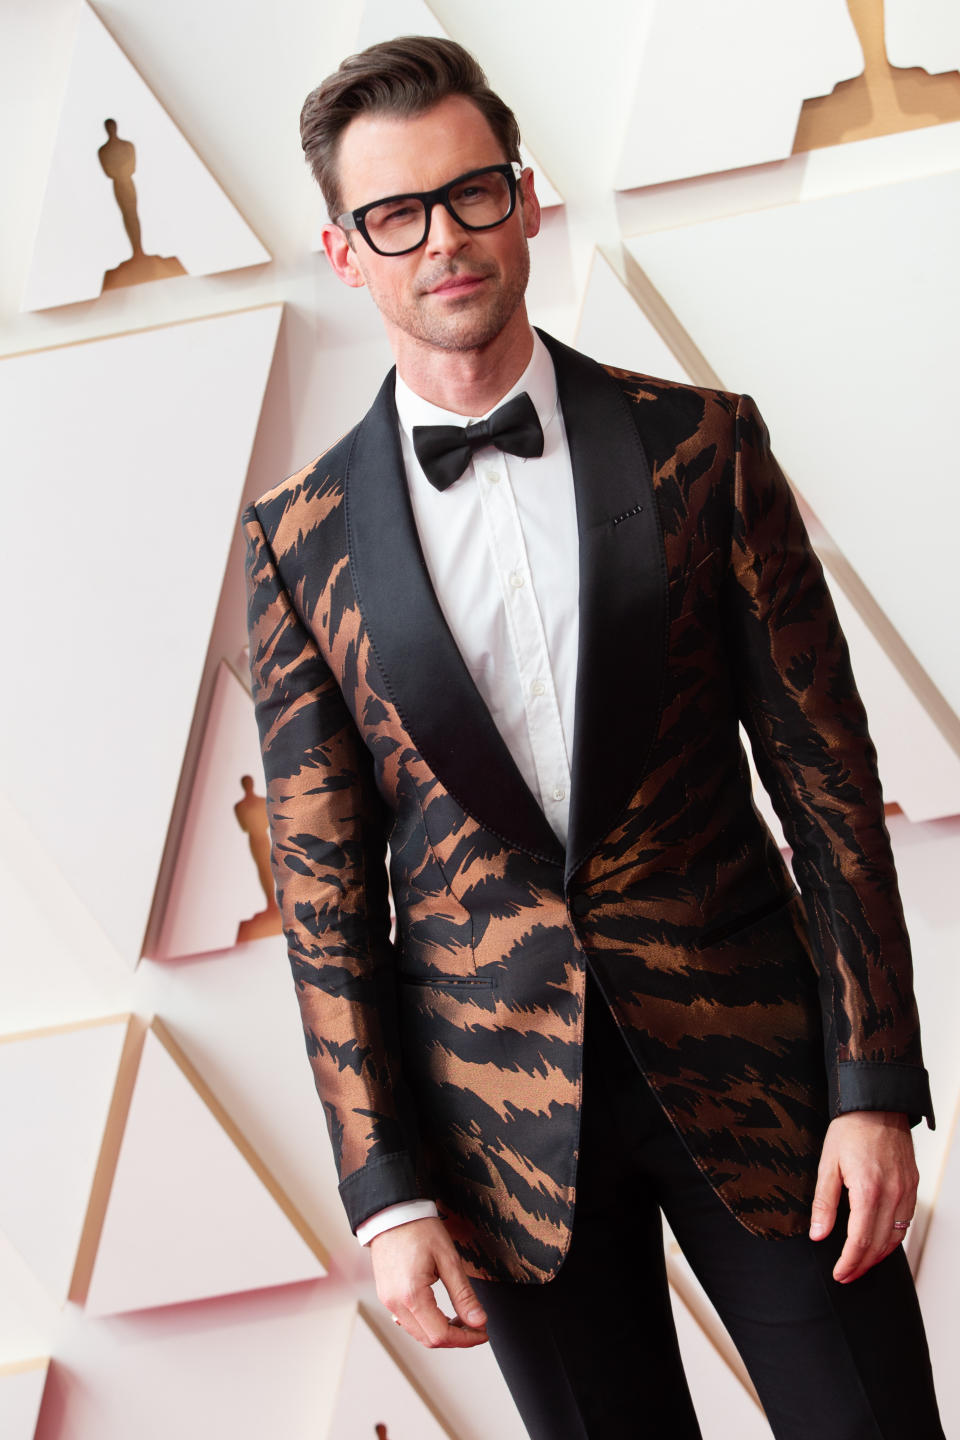 Brad Goreski at the 94th Academy Awards held at Dolby Theatre at the Hollywood & Highland Center on March 27th, 2022 in Los Angeles, California.